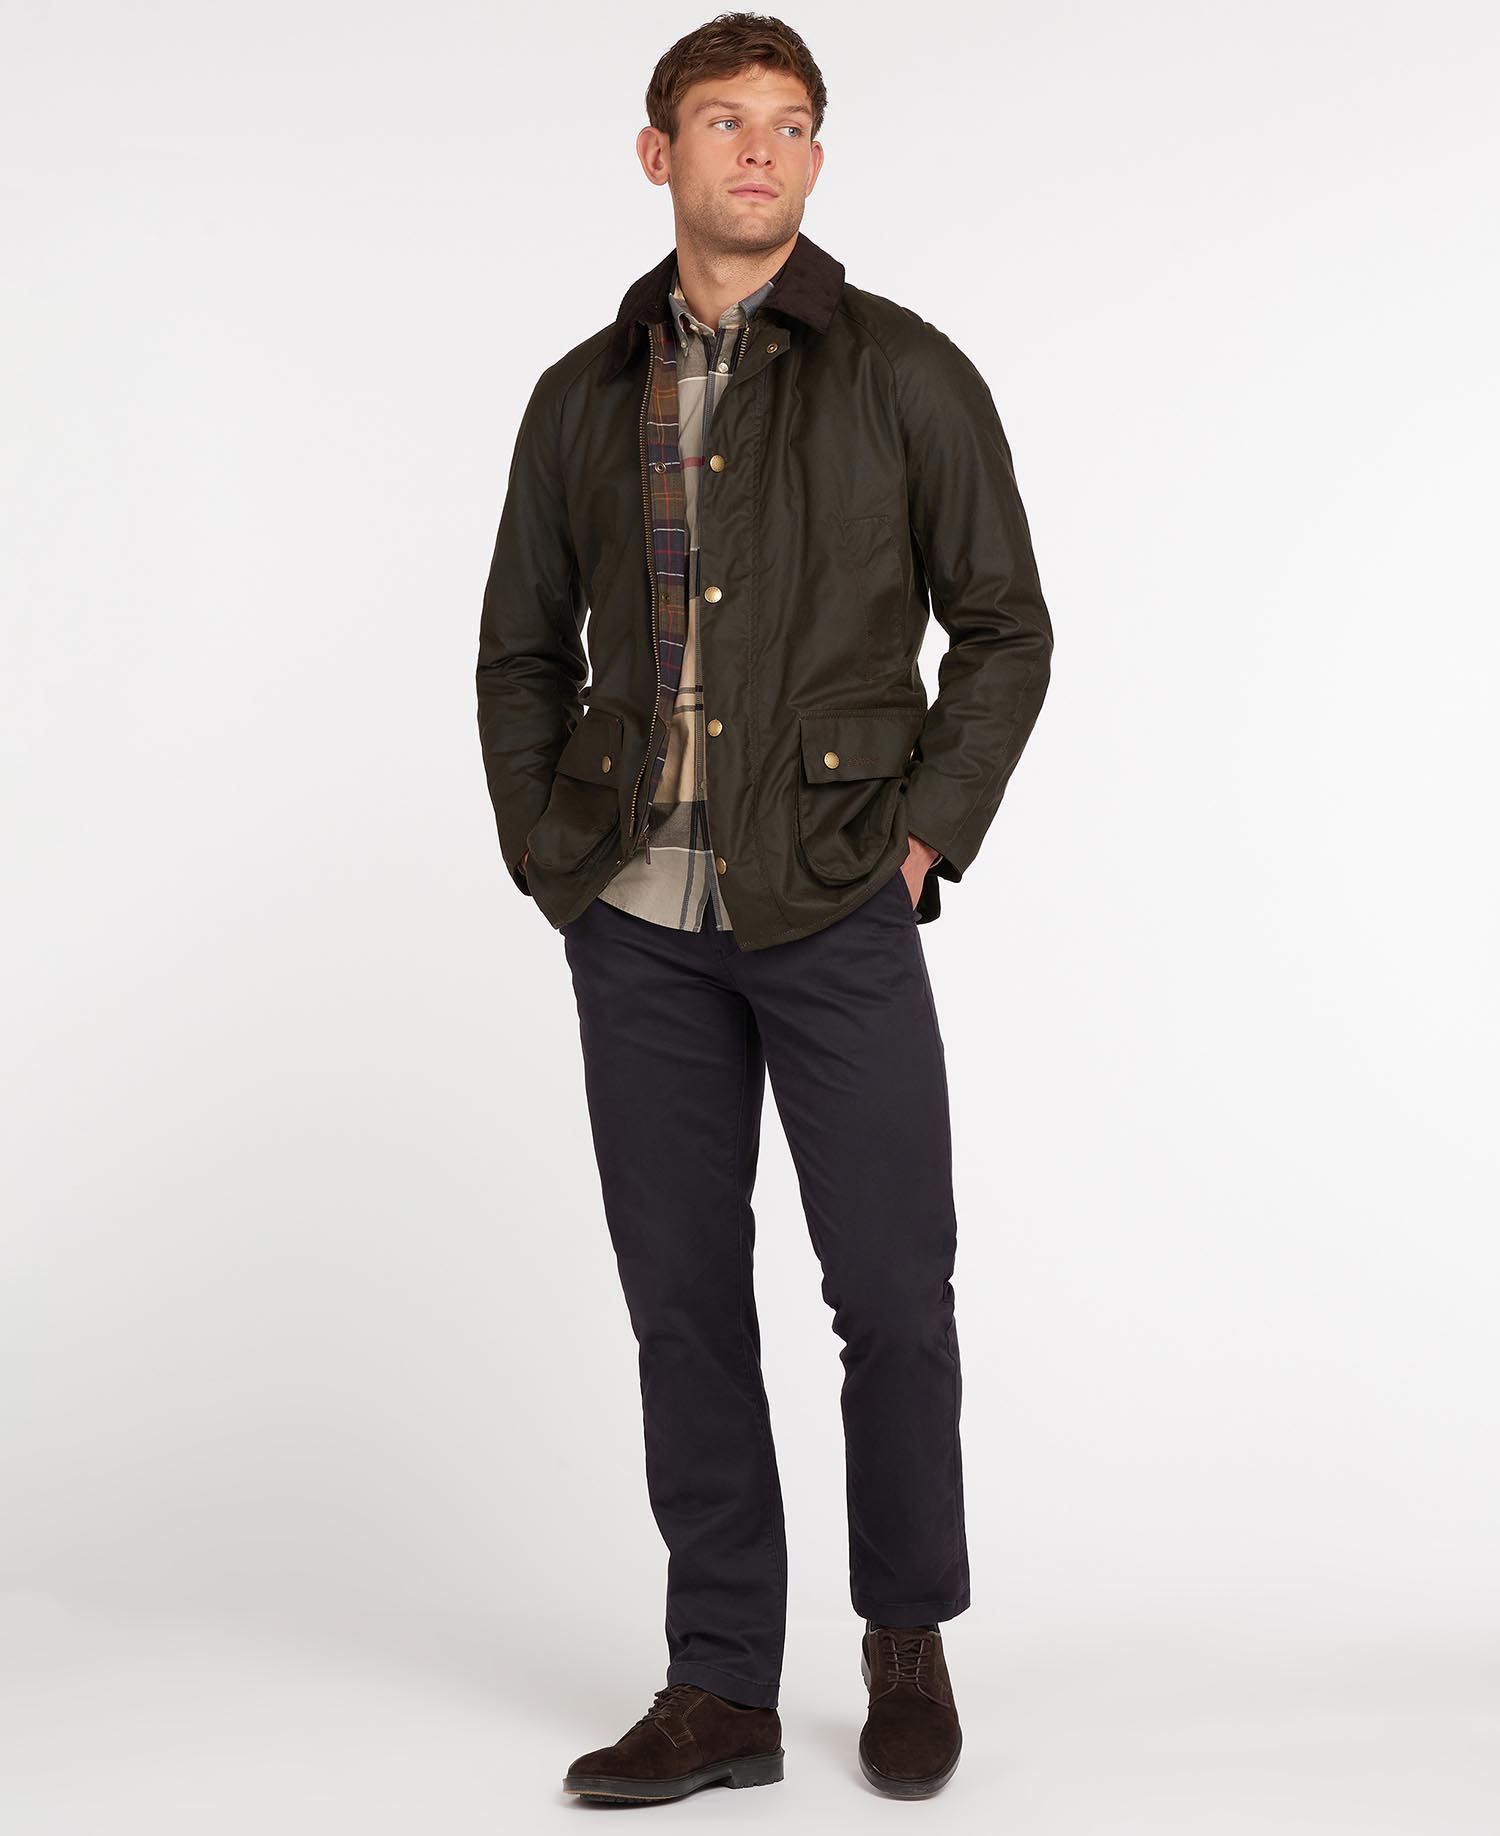 Barbour – Ashby Wax Jacket – Olive – The Jail Dornoch